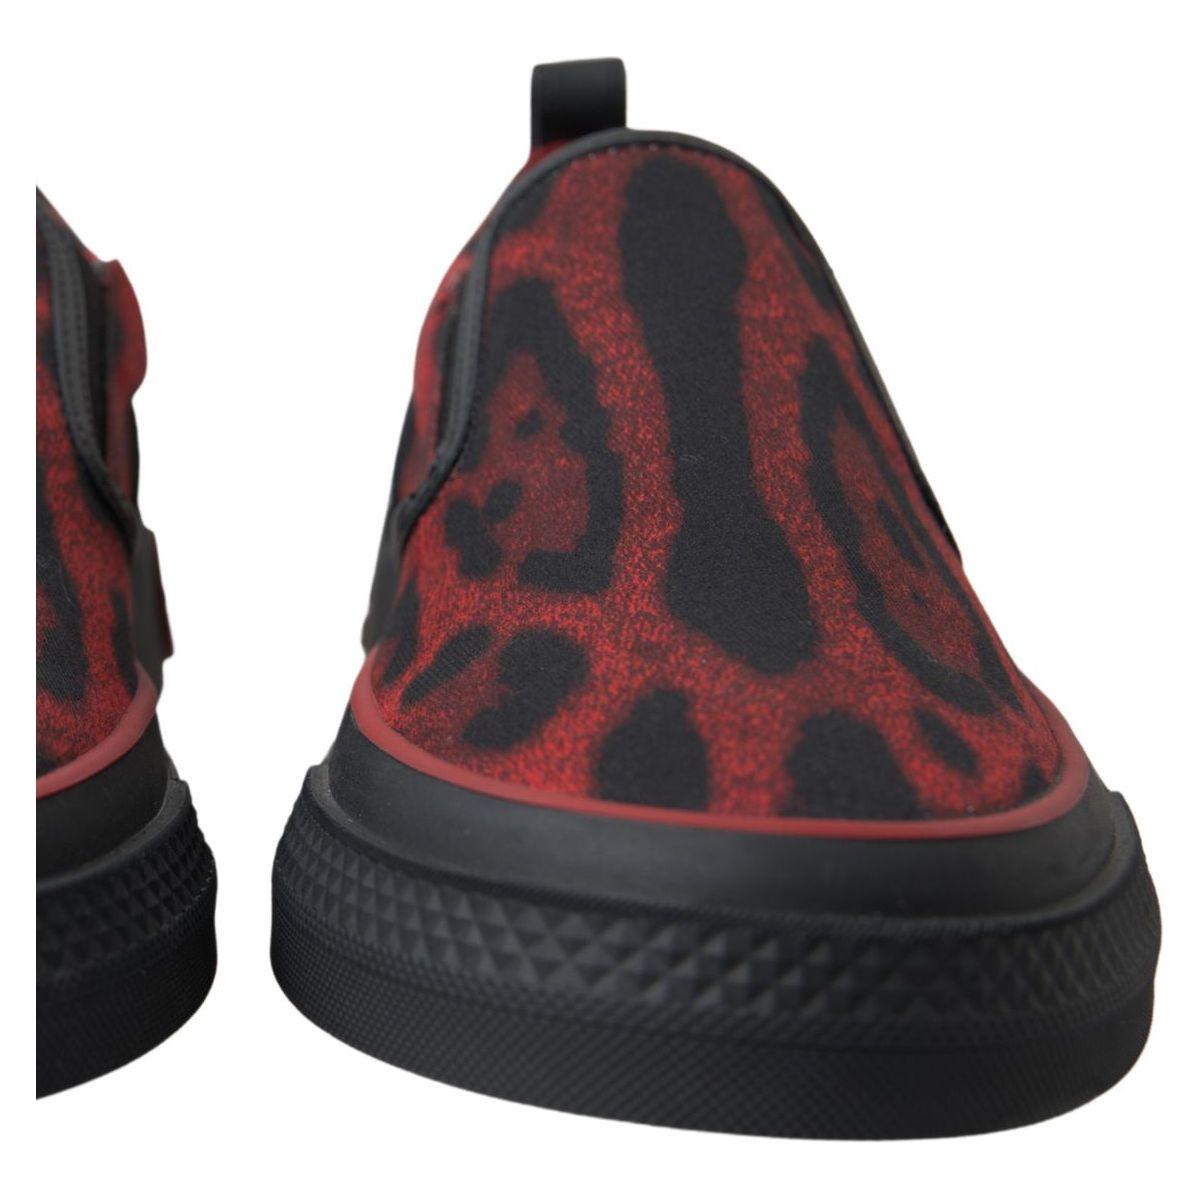 Dolce & Gabbana Chic Leopard Print Loafers Sneakers red-black-leopard-loafers-sneakers-shoes